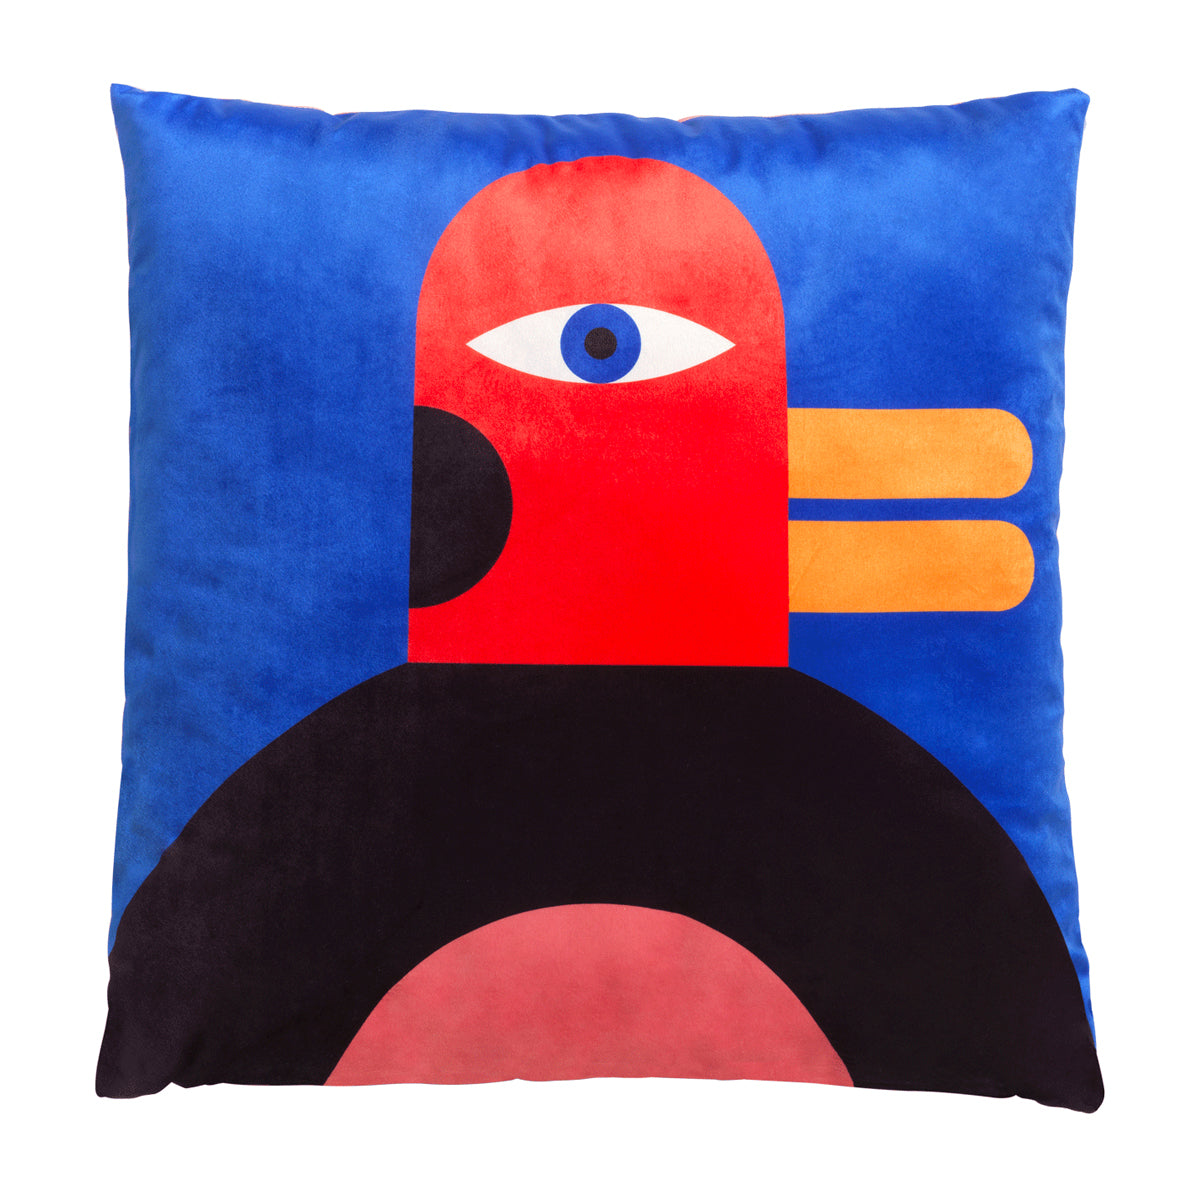 Oggian Duck Cushion Cover by Marco Oggian